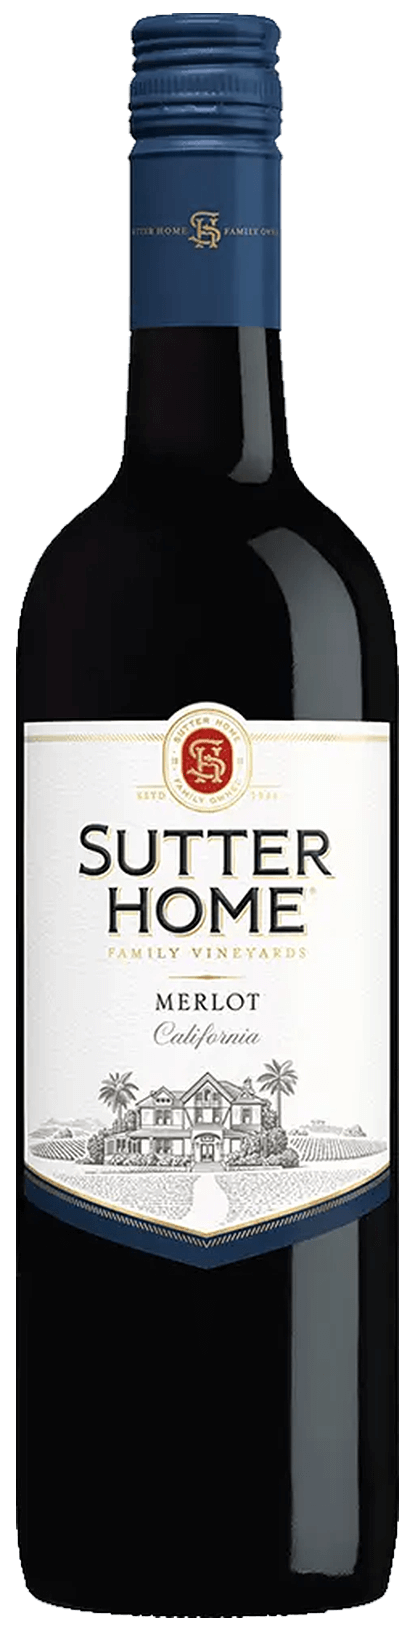 sutter home wines